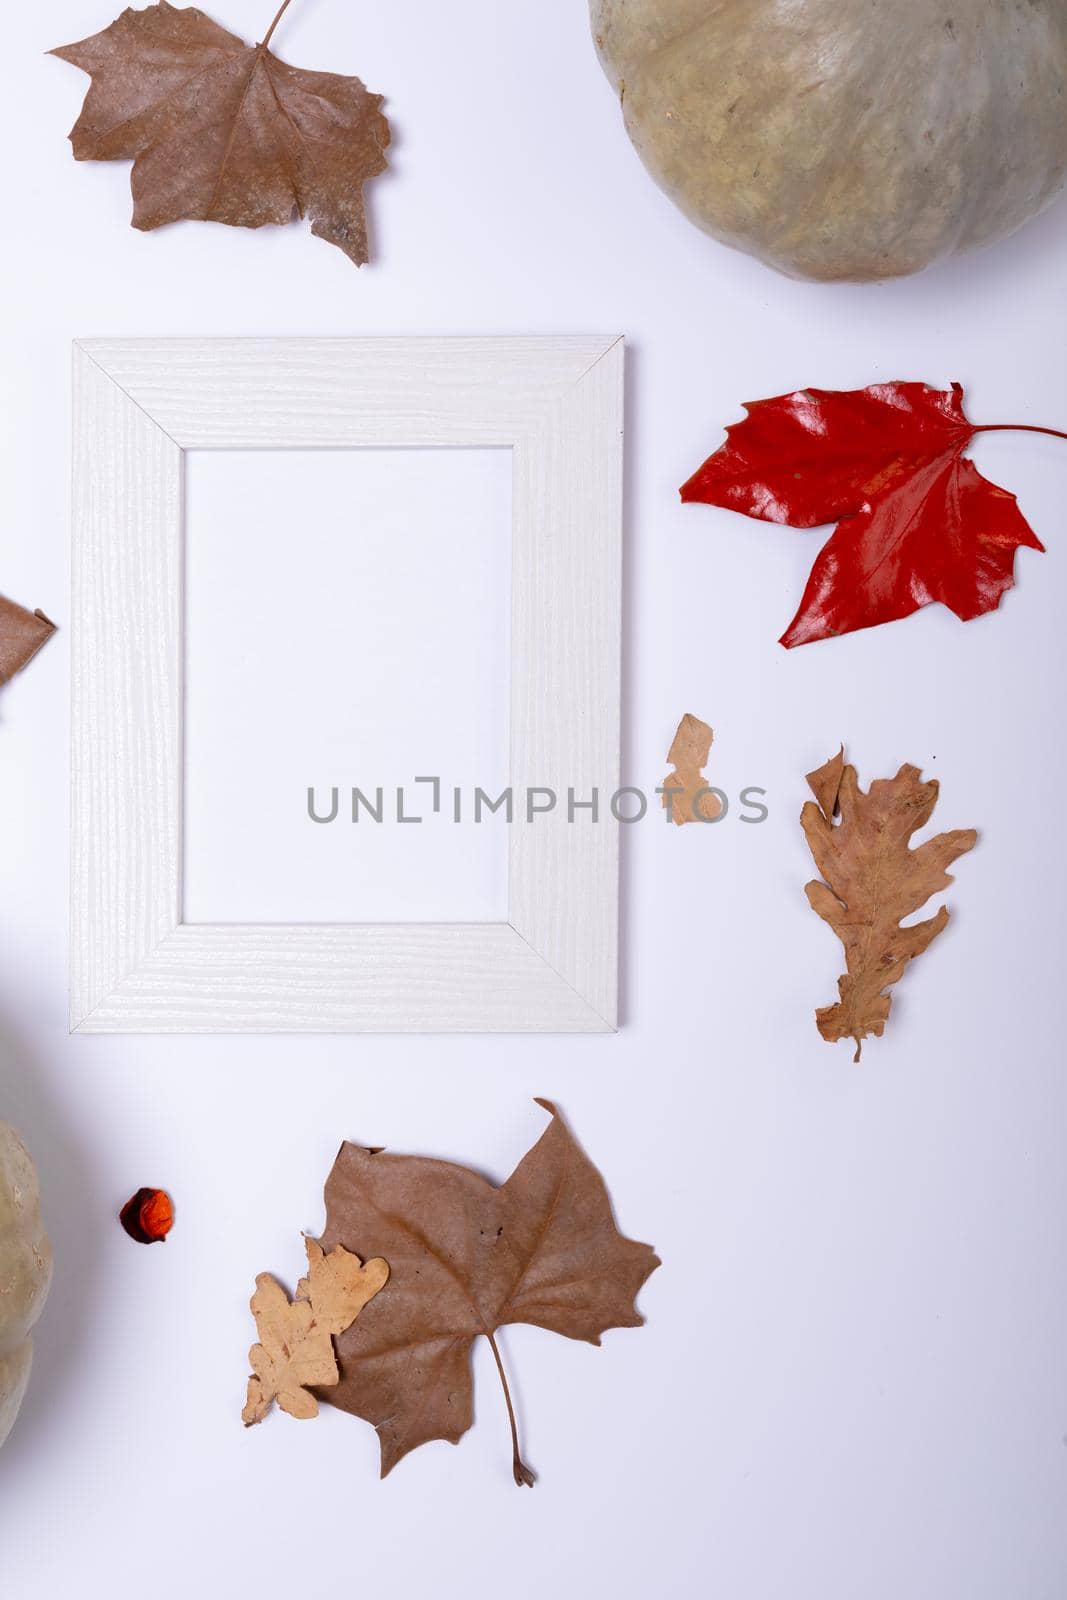 Pumpkin, autumn leaves and empty frame with copy space on white surface. autumn season and halloween concept